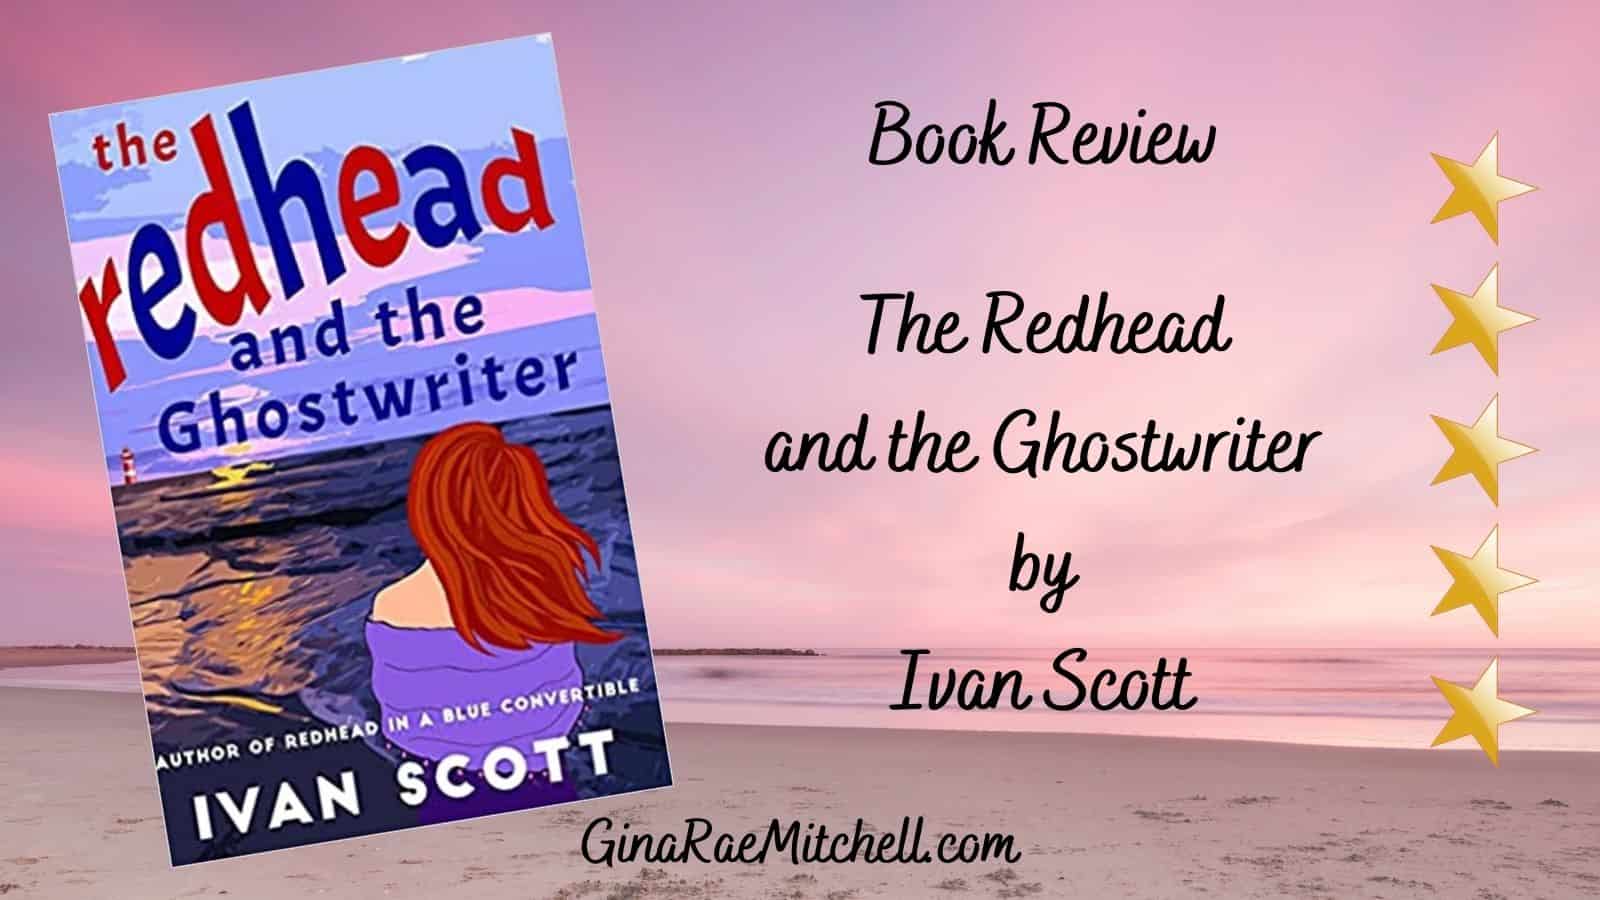 The Redhead and the Ghostwriter by Ivan Scott | 5-Star Review | Fun & Touching